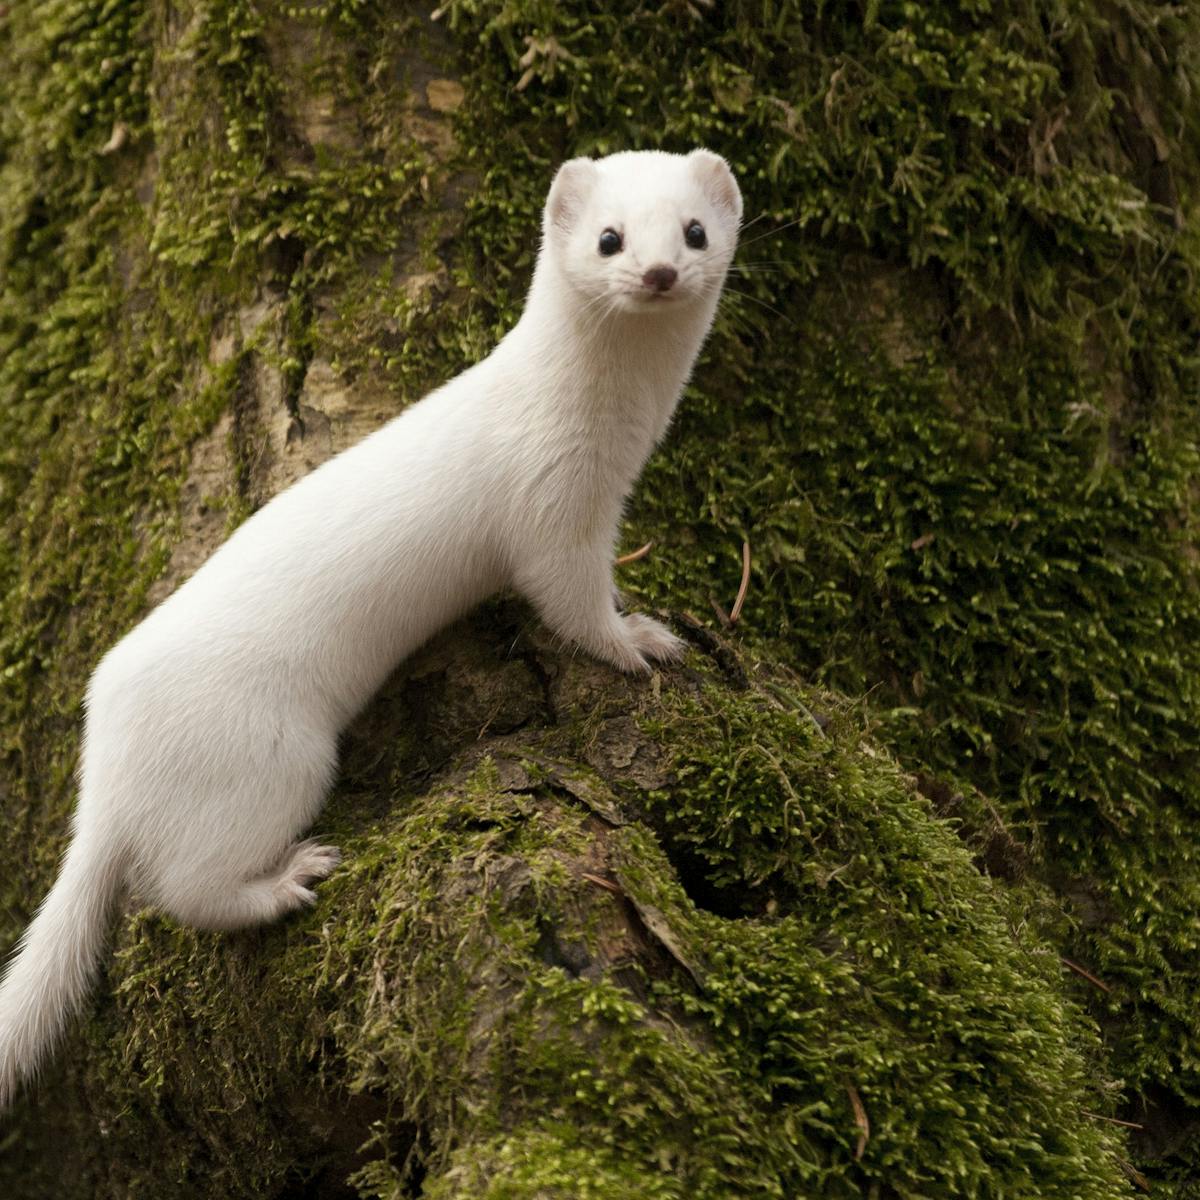 Climate change has left some weasels with mismatched camouflage